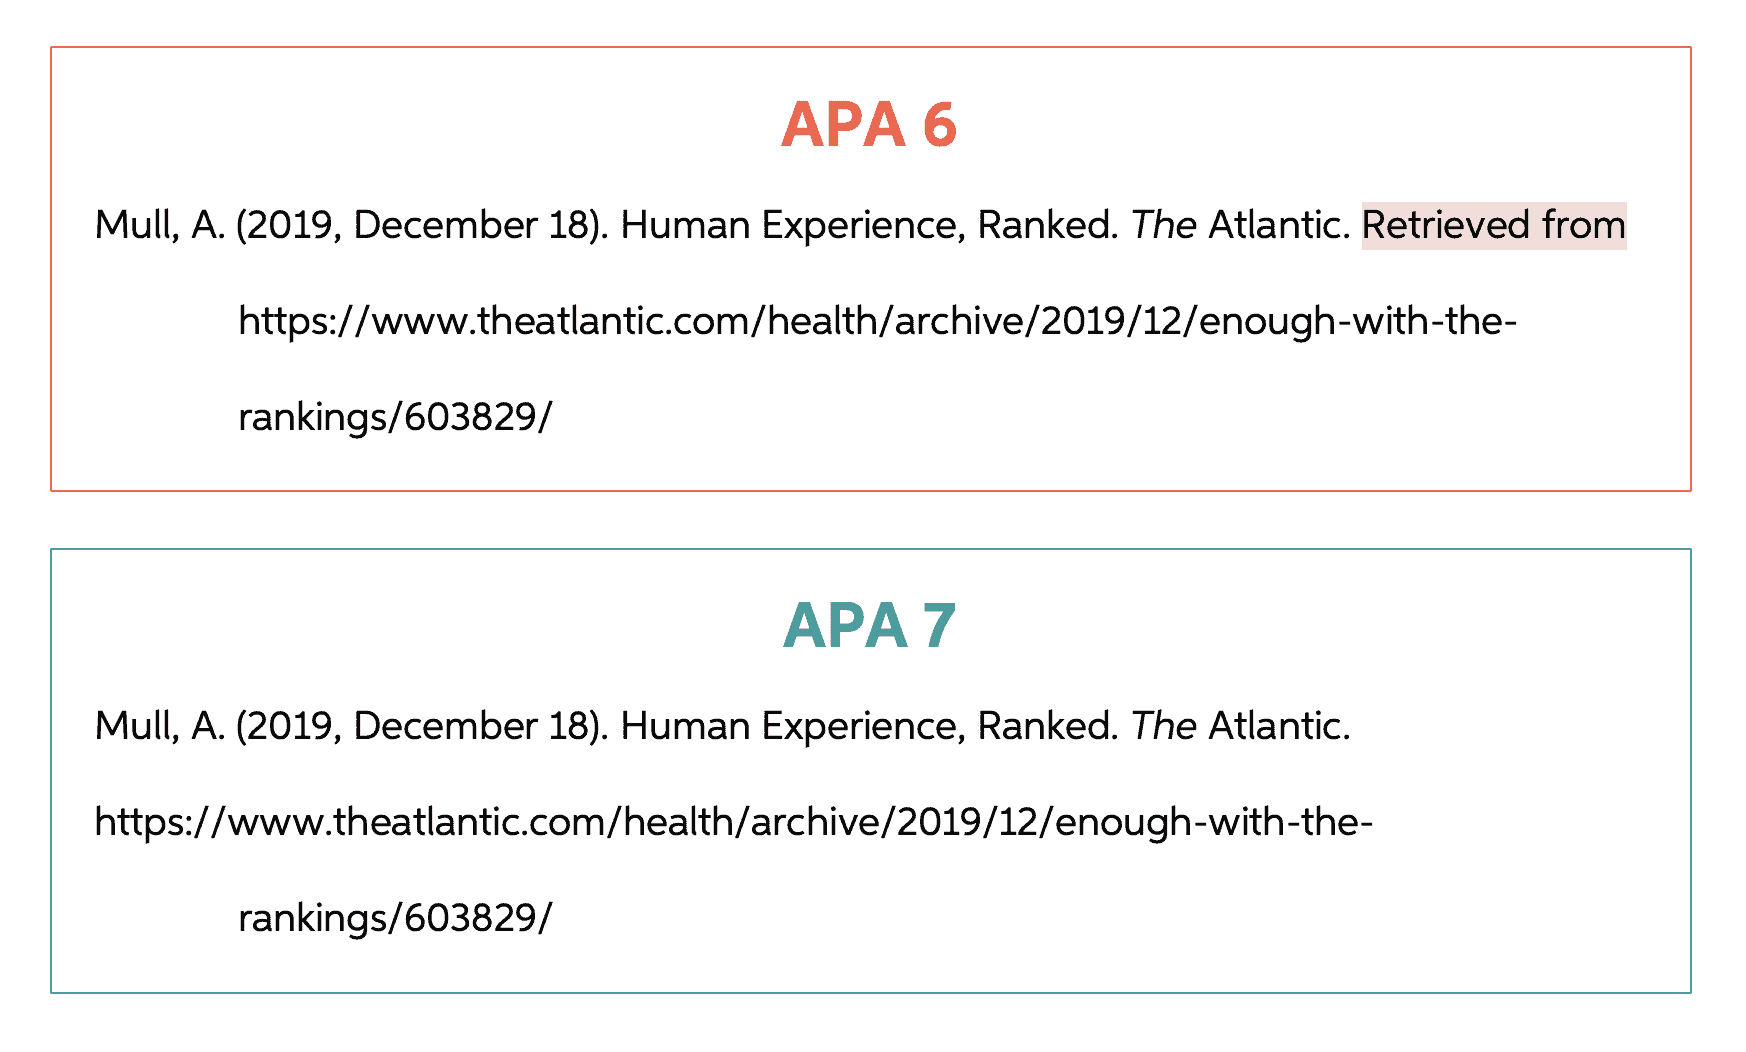 apa format for websites 7th edition